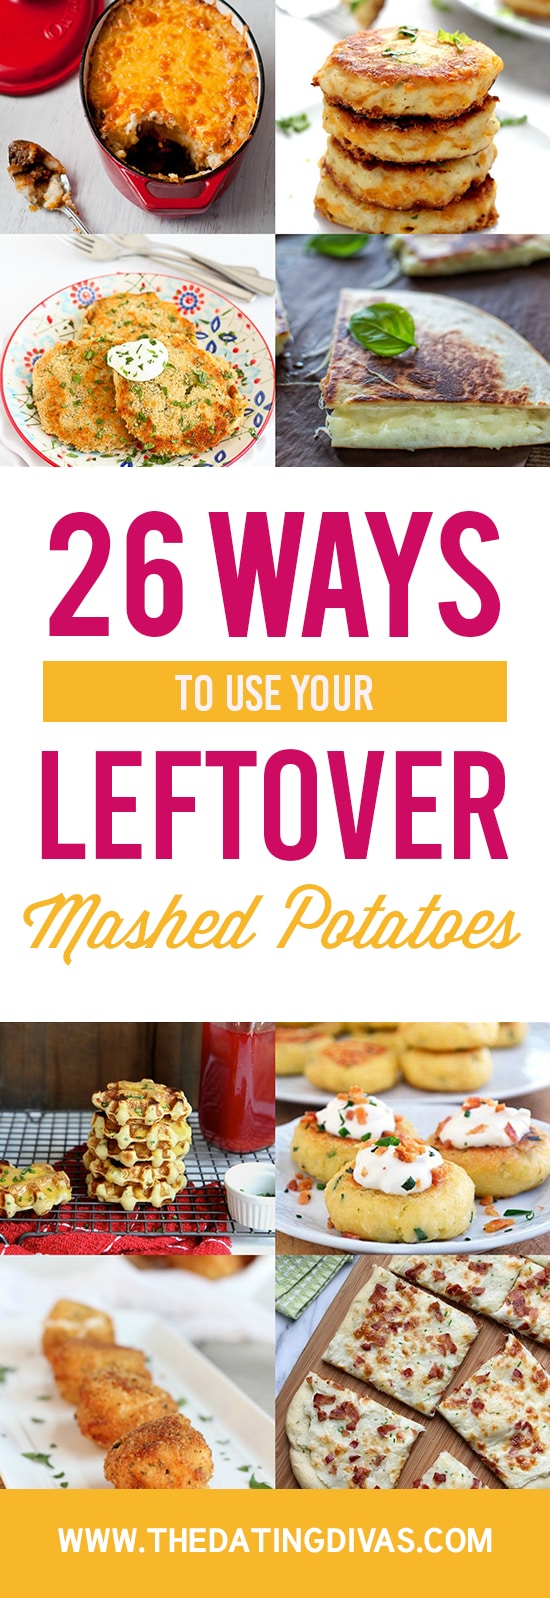 Ways to Use Your Leftover Mashed Potatoes